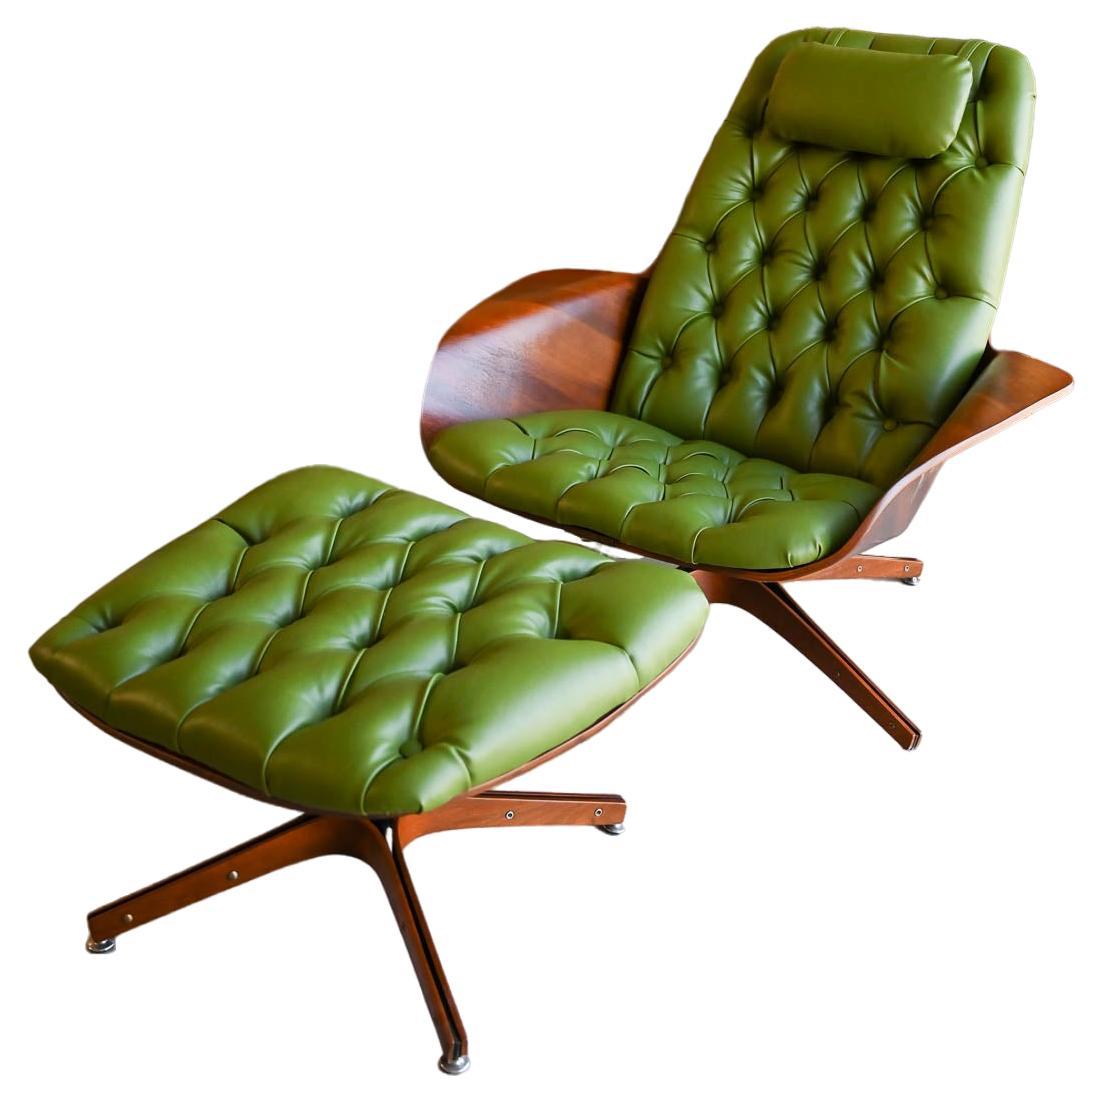 Mr. Chair with Ottoman by George Mulhauser for Plycraft, ca. 1960